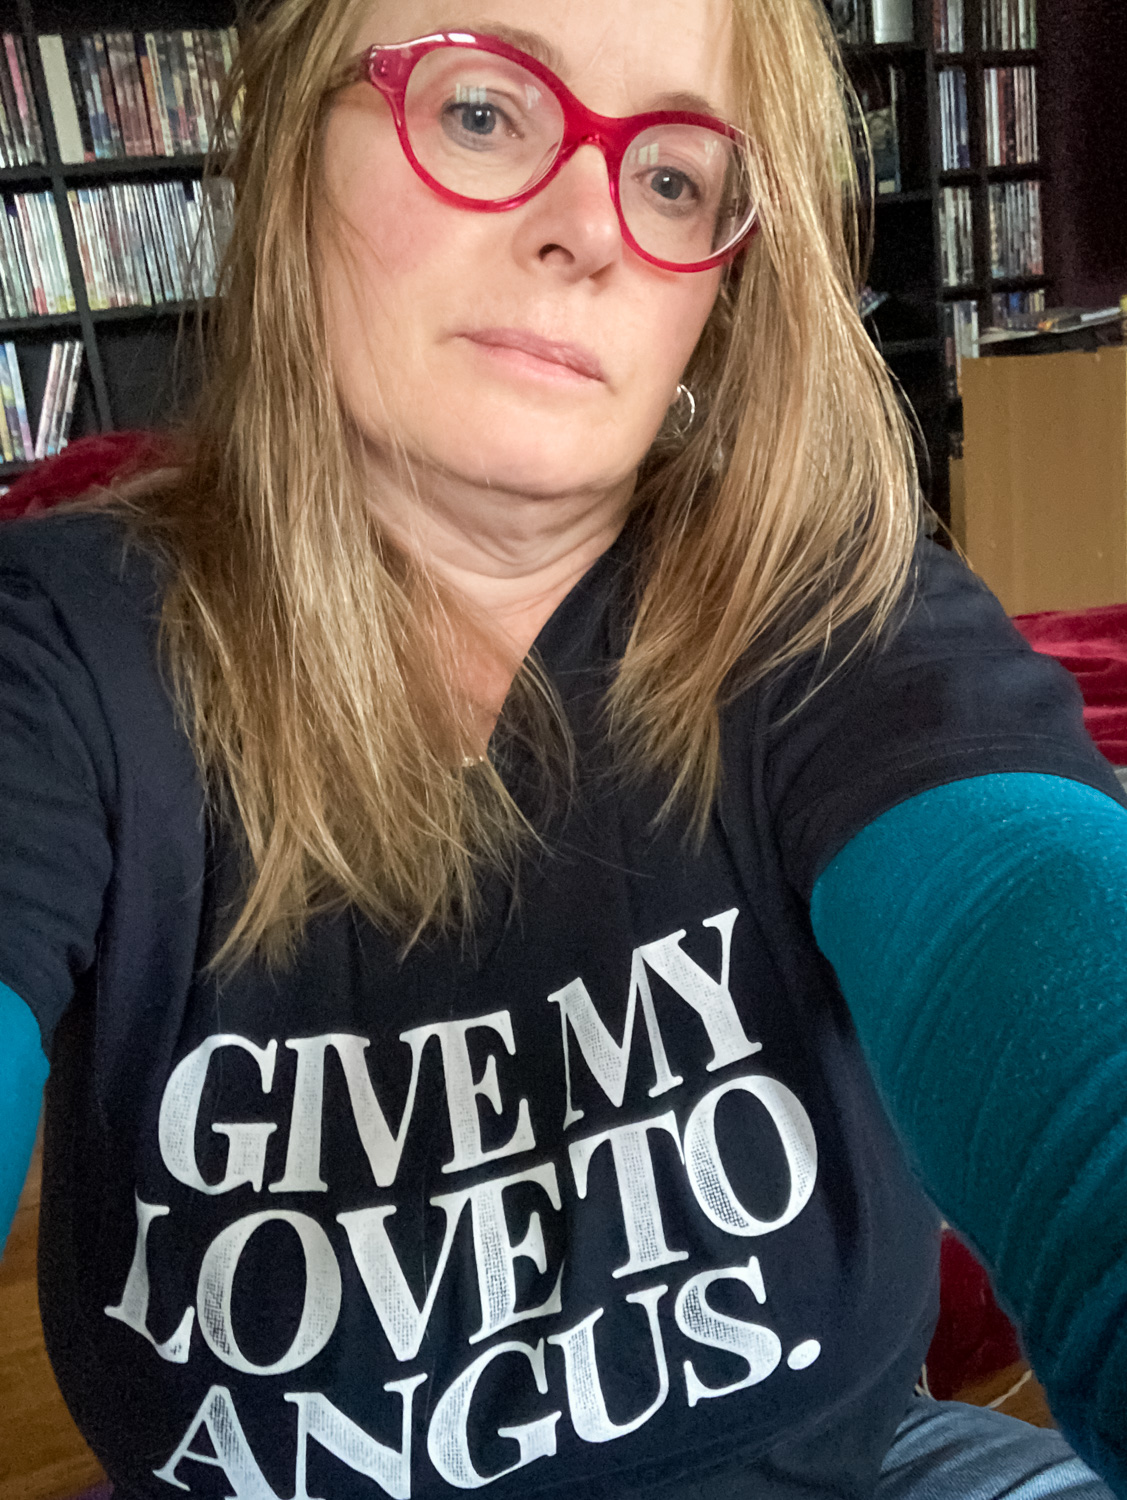 Barb is wearing a dark blue t-shirt with the words "GIVE MY LOVE TO ANGUS" o the front. She has long blonde hair and pink glasses